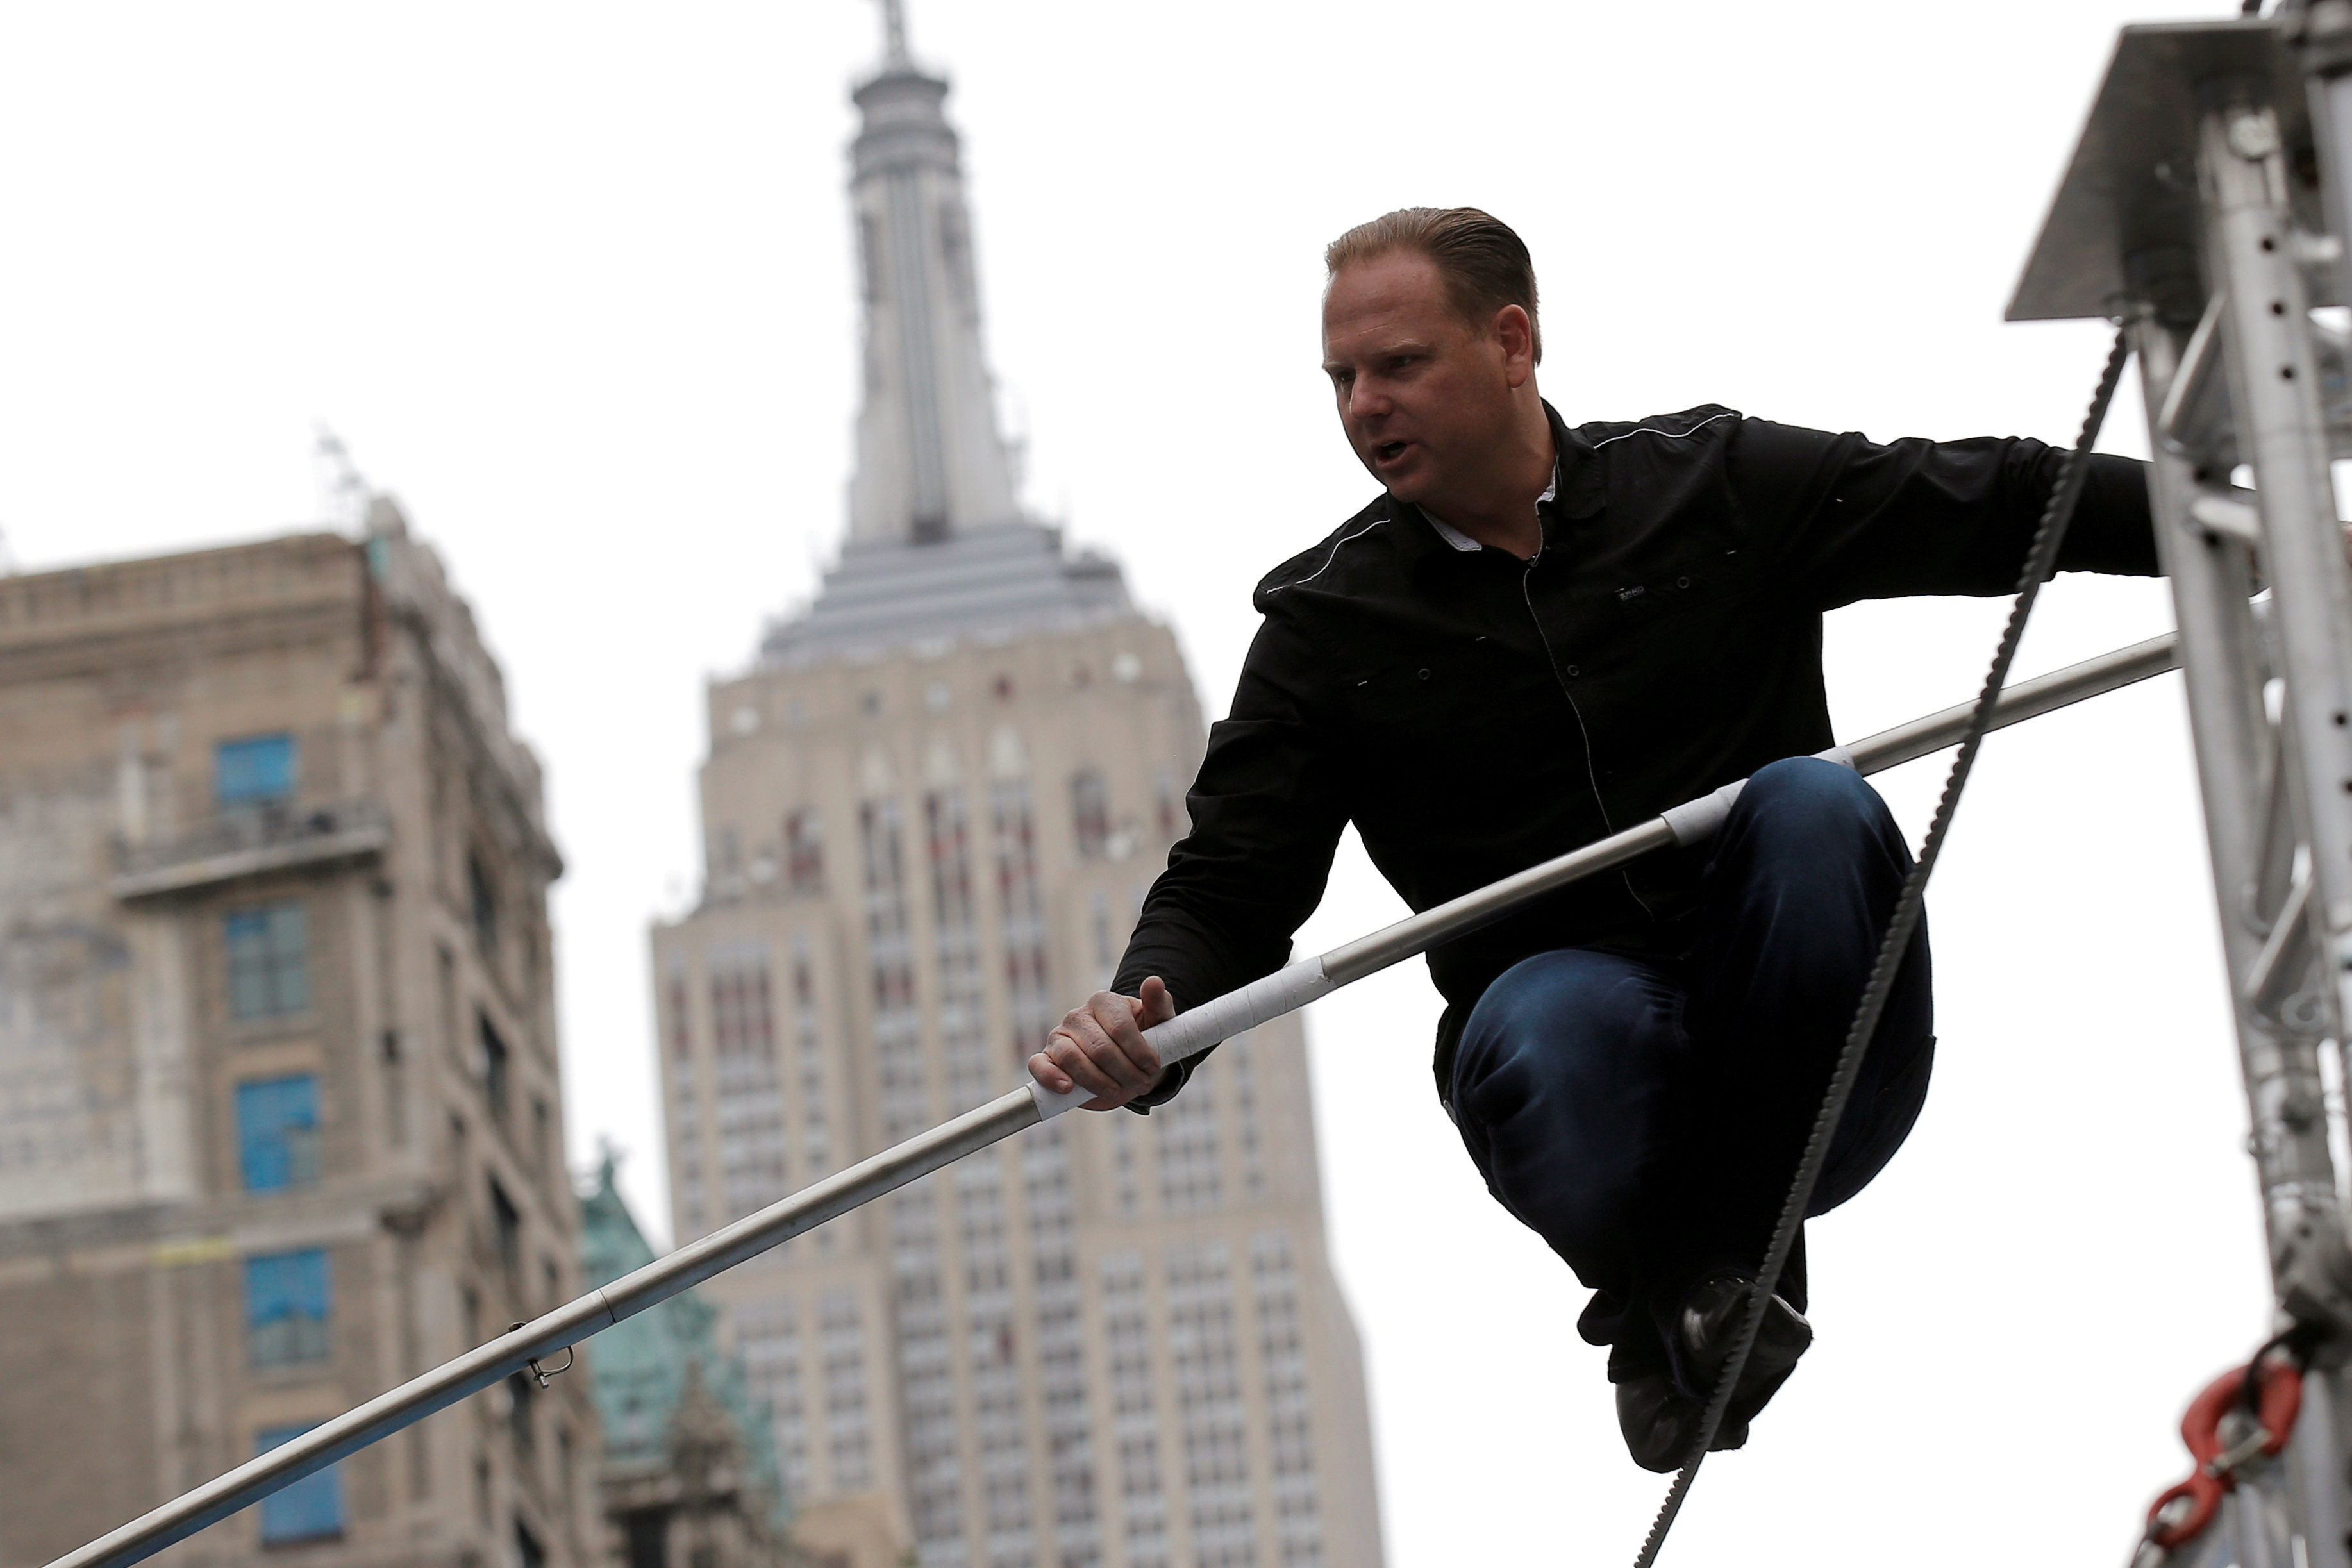 FILE - Aerialist Nik Wallenda walks a tightrope during a promotional event in midtown Manhattan, with the Empire State Building behind him, in New York City, U.S., May 17, 2016. REUTERS/Brendan McDermid -/File Photo